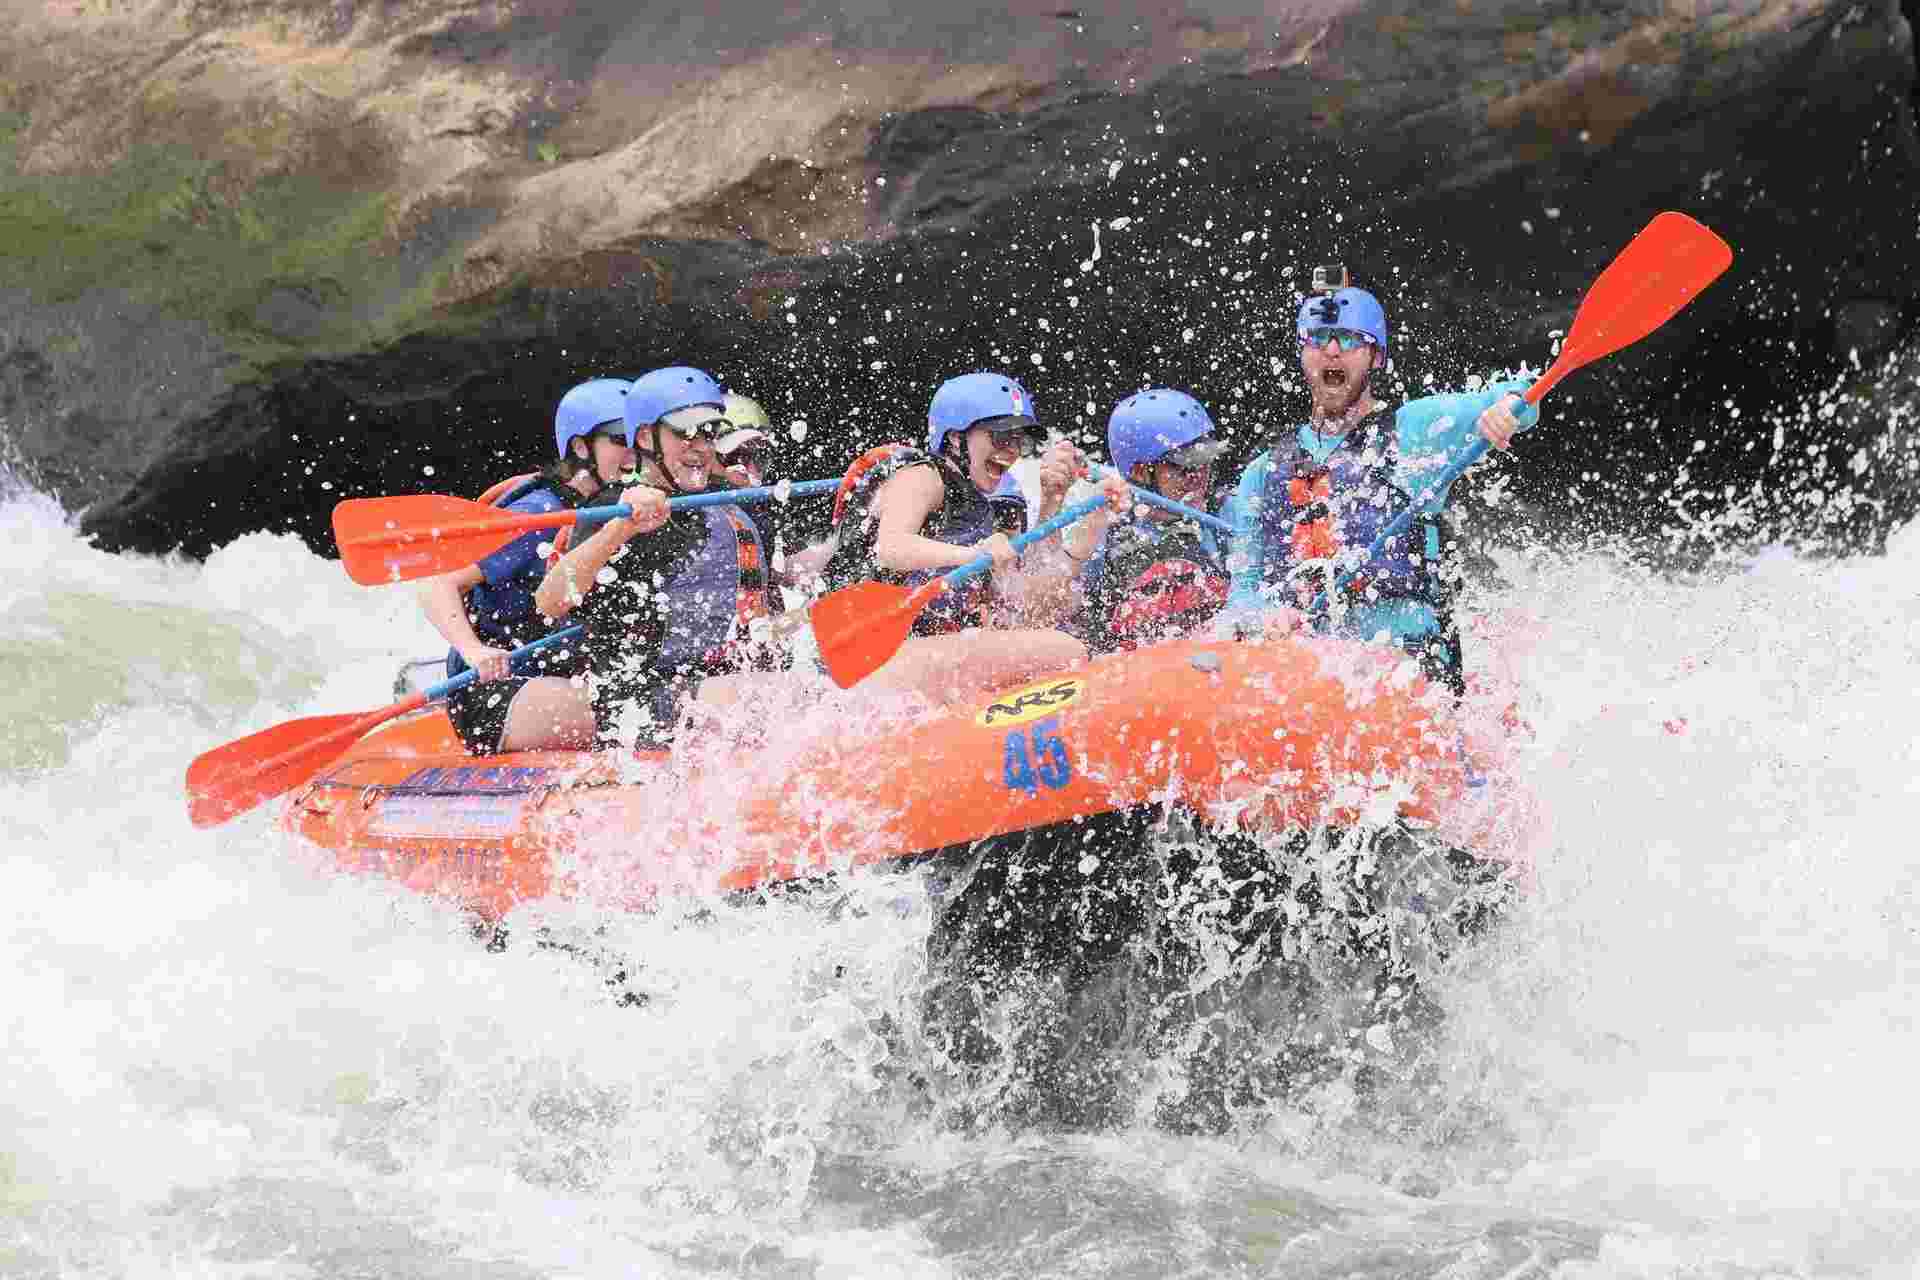 water rafting is sport or recreational activity